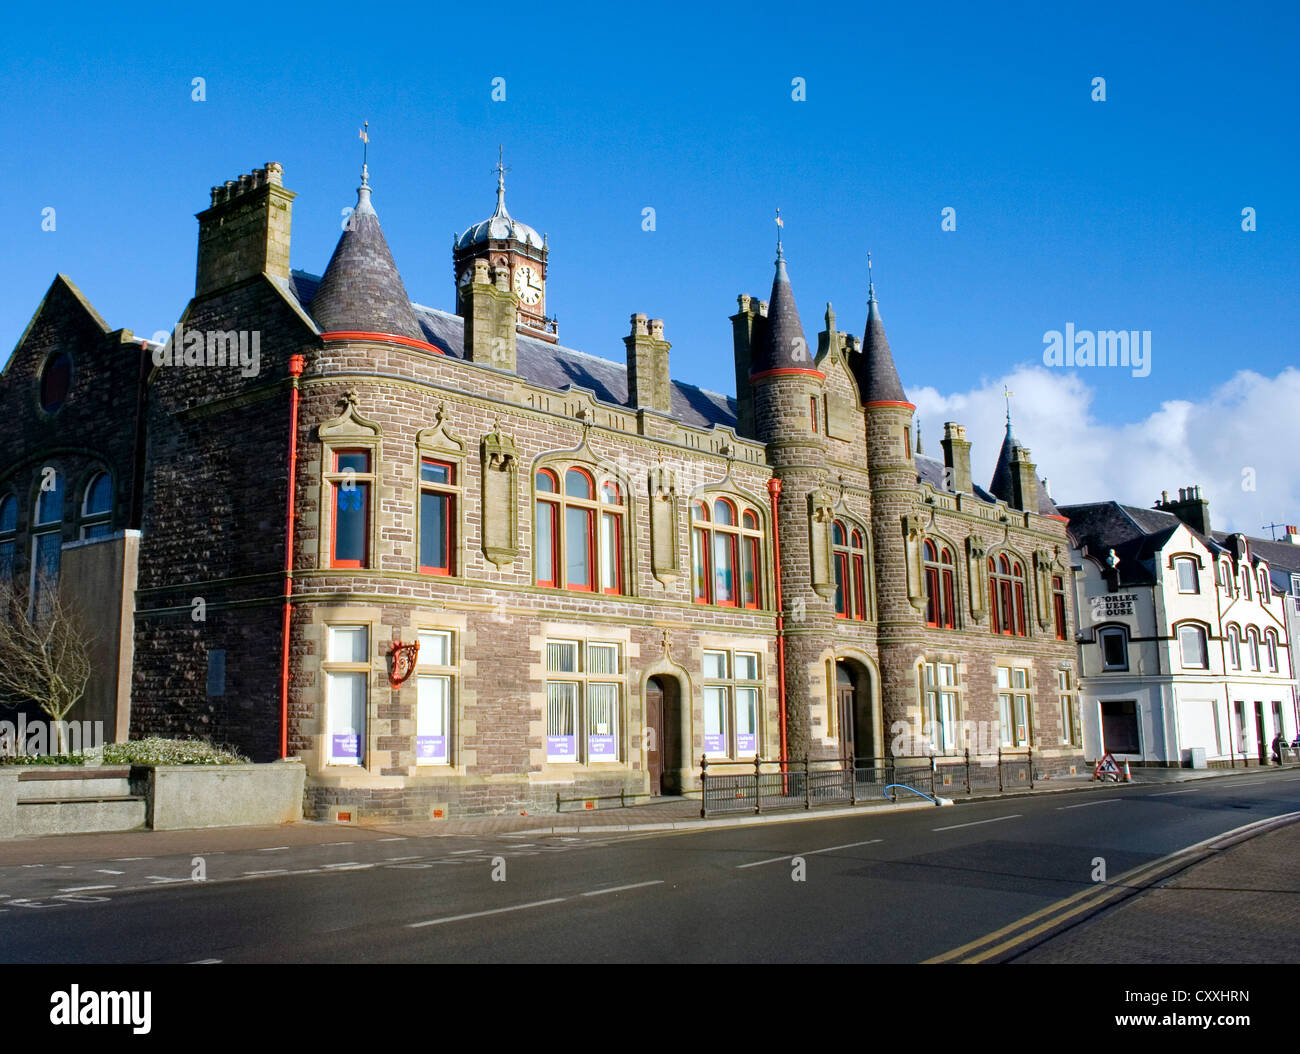 The Town Hall building in Stornoway, Isle of Lewis Stock Photo